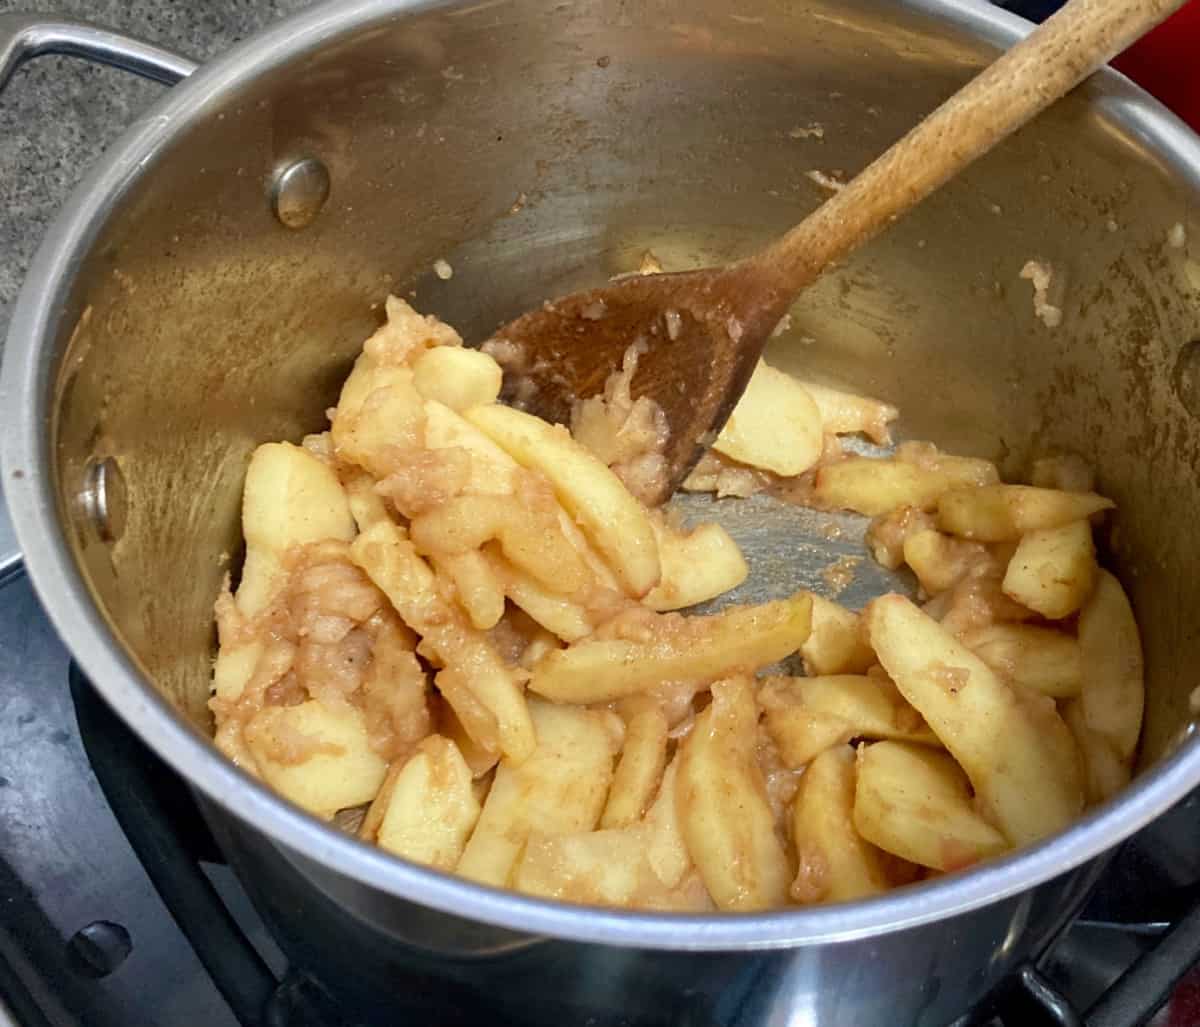 Cooking apples and cinnamon in saucepan with wooden spoon.